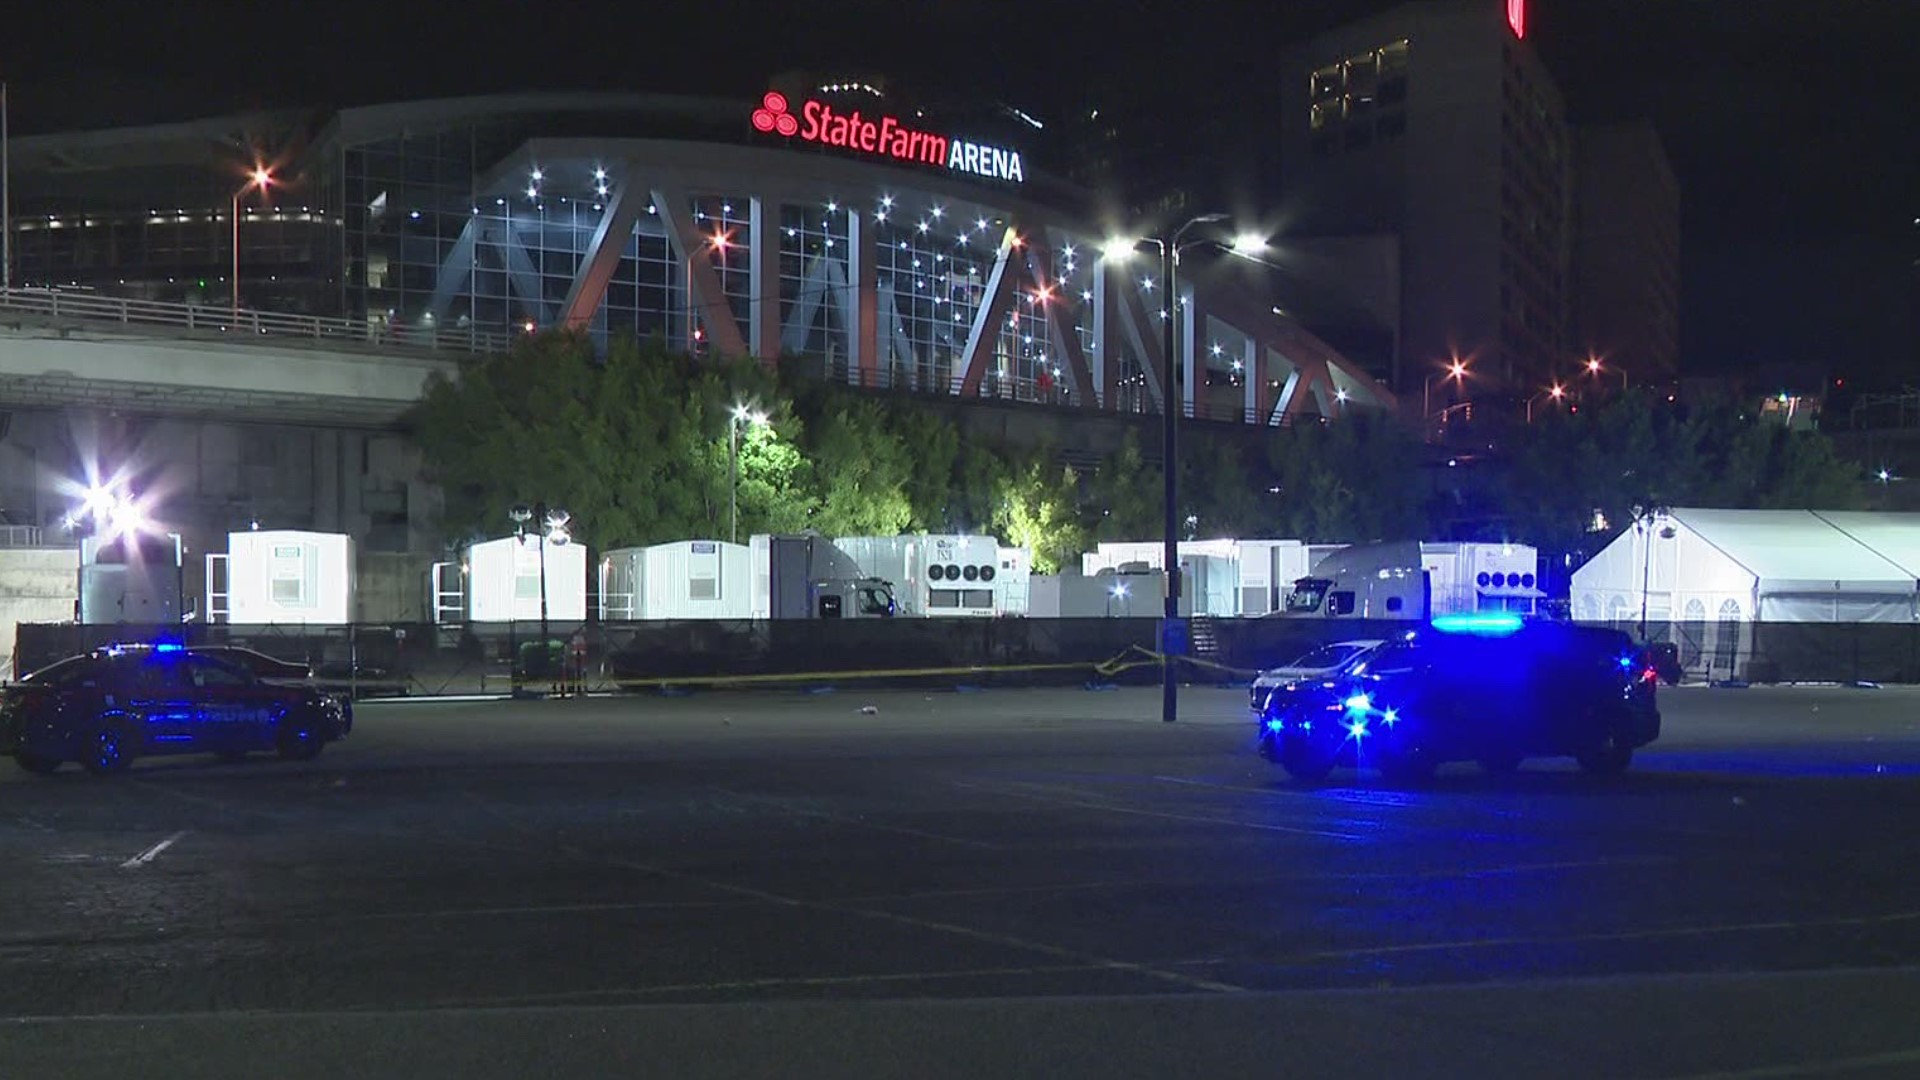 Atlanta police say two men and a woman were leaving the arena and walking to their car when they were shot